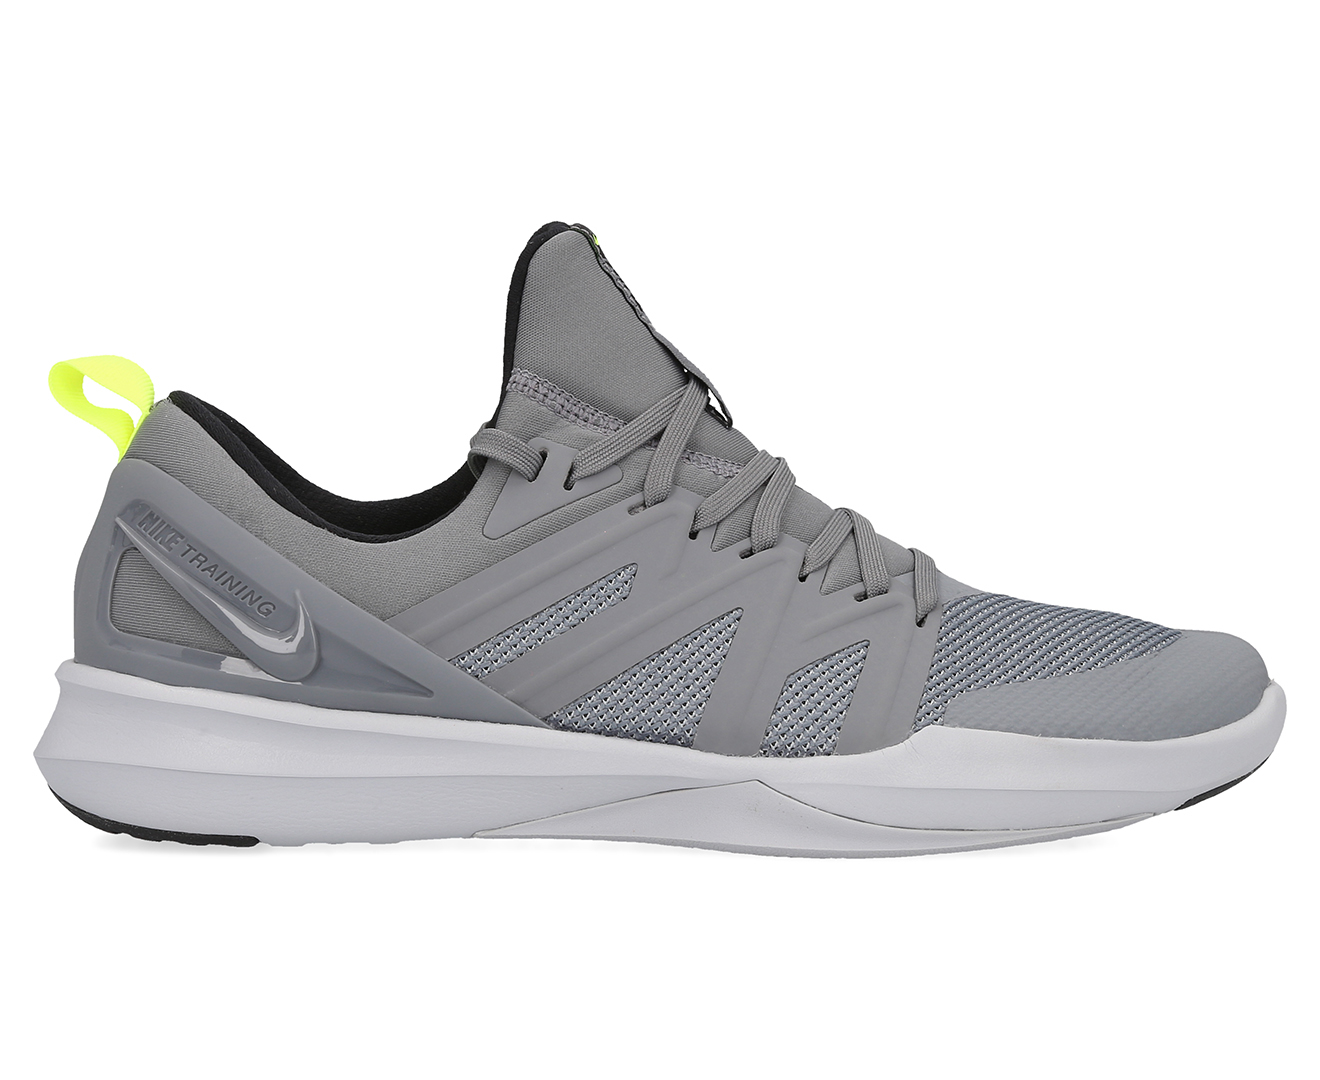 nike victory elite trainer shoes